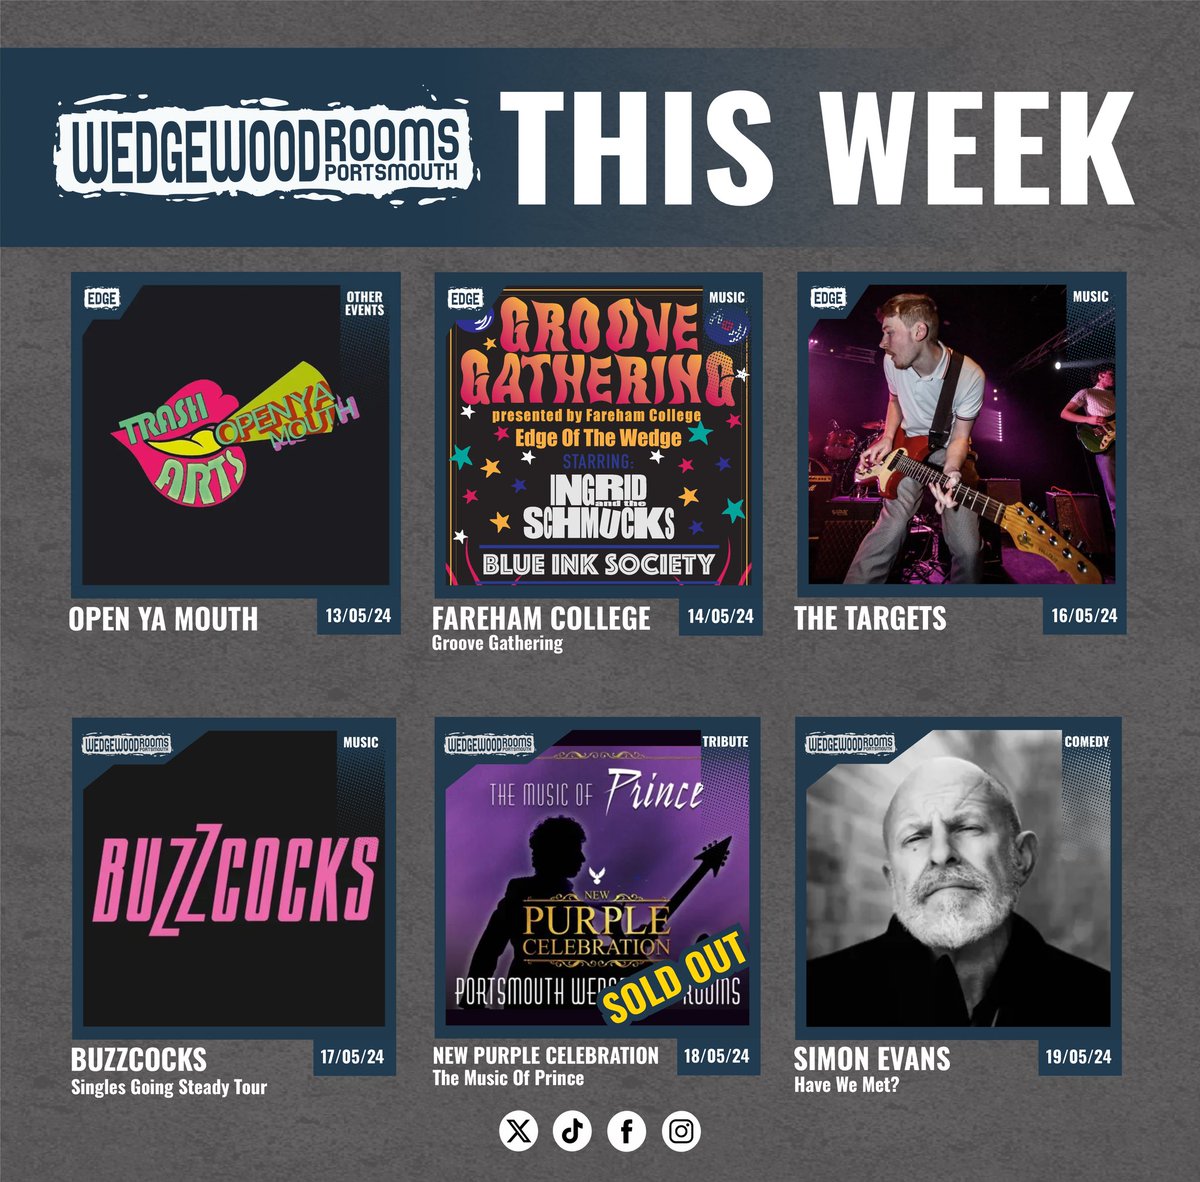 This week at the Wedge!😍 @OpenYaMouthTA Fareham College presents Groove Gathering Biff!Bang!Pow! present The Targets w/ Owen Vincent + Caleb Clarkson @Buzzcocks w/ @TheStraights_uk @NPCelebration Simon Evans: Have We Met? 👉 wedgewood-rooms.co.uk 👈